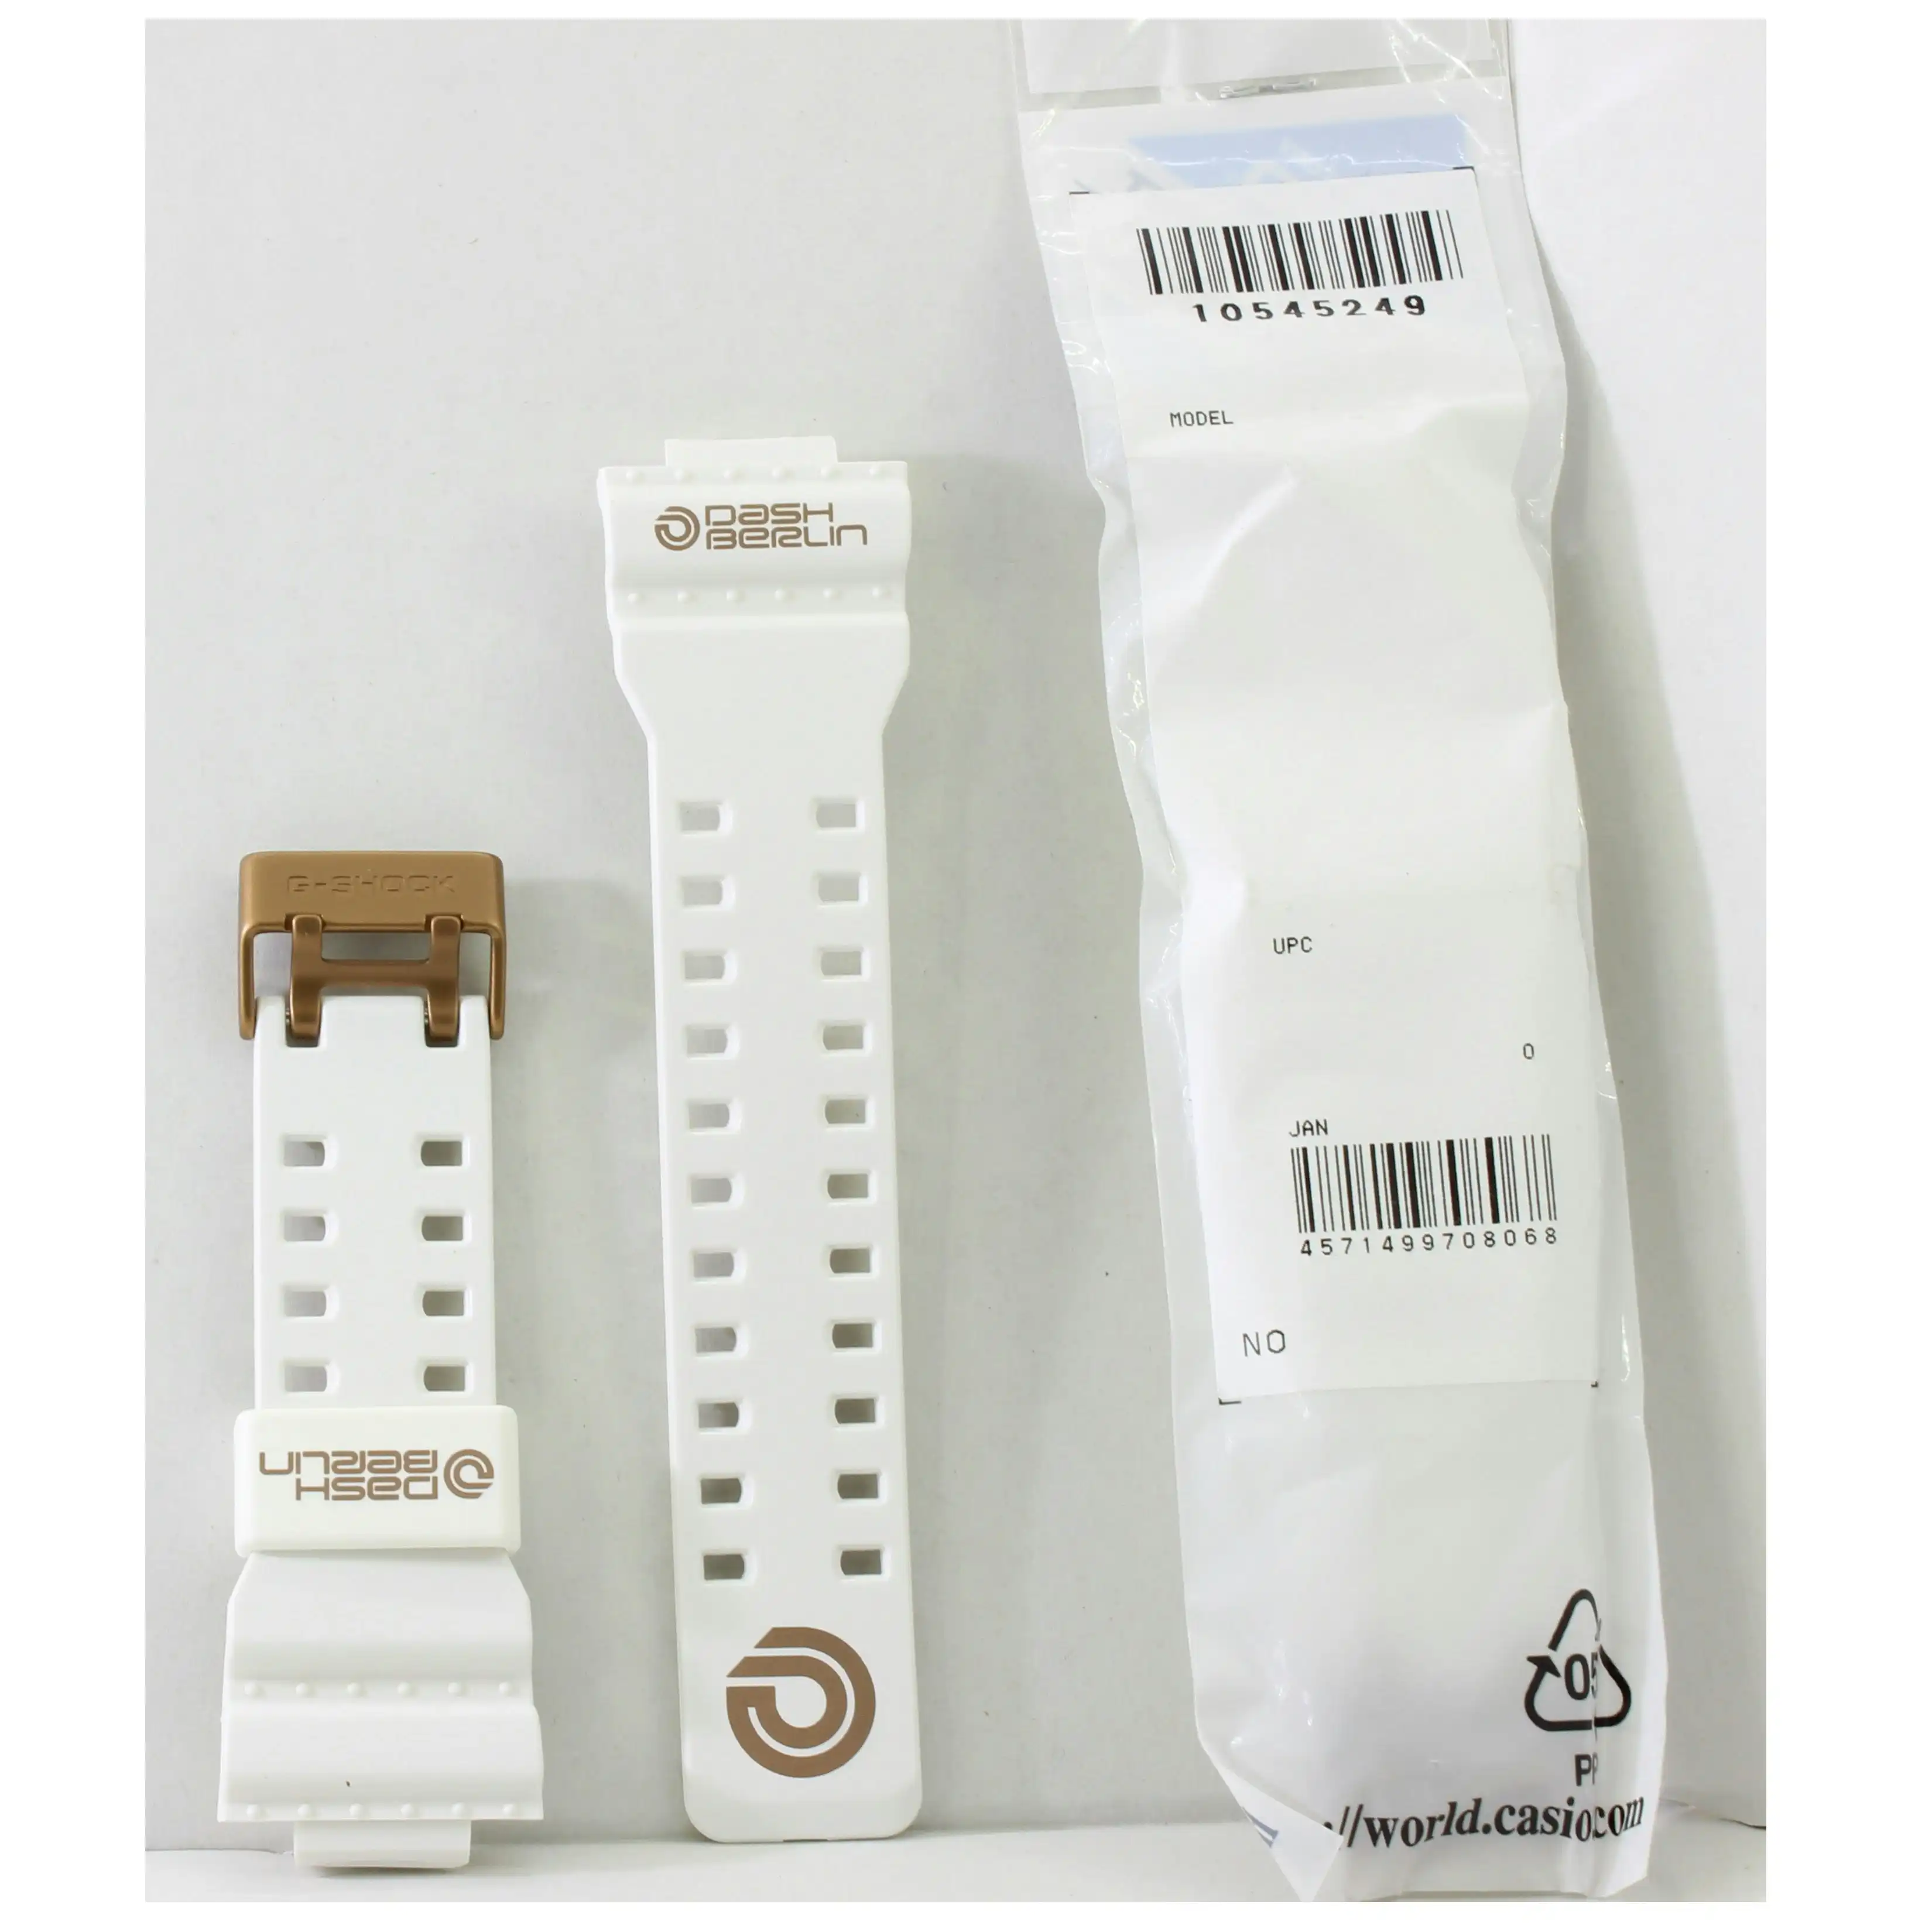 Casio G-Shock Shiny White Genuine Replacement Strap 10545249 to suit GA-110DB-7A Dash Berlin